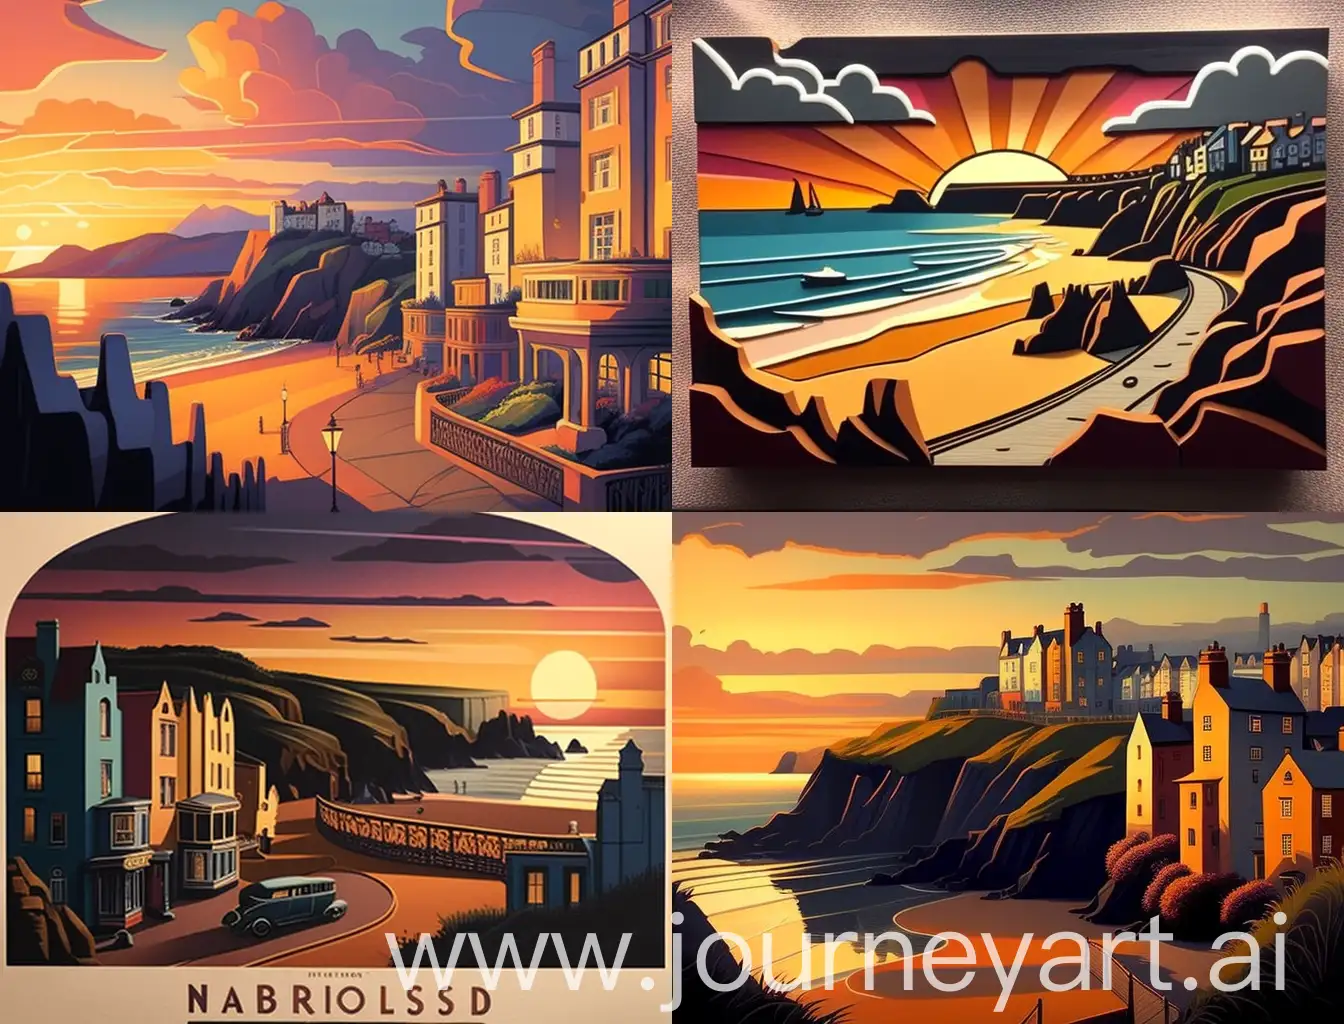 A beautiful sunset over North beach, in Tenby, Painted in an Art Deco style.